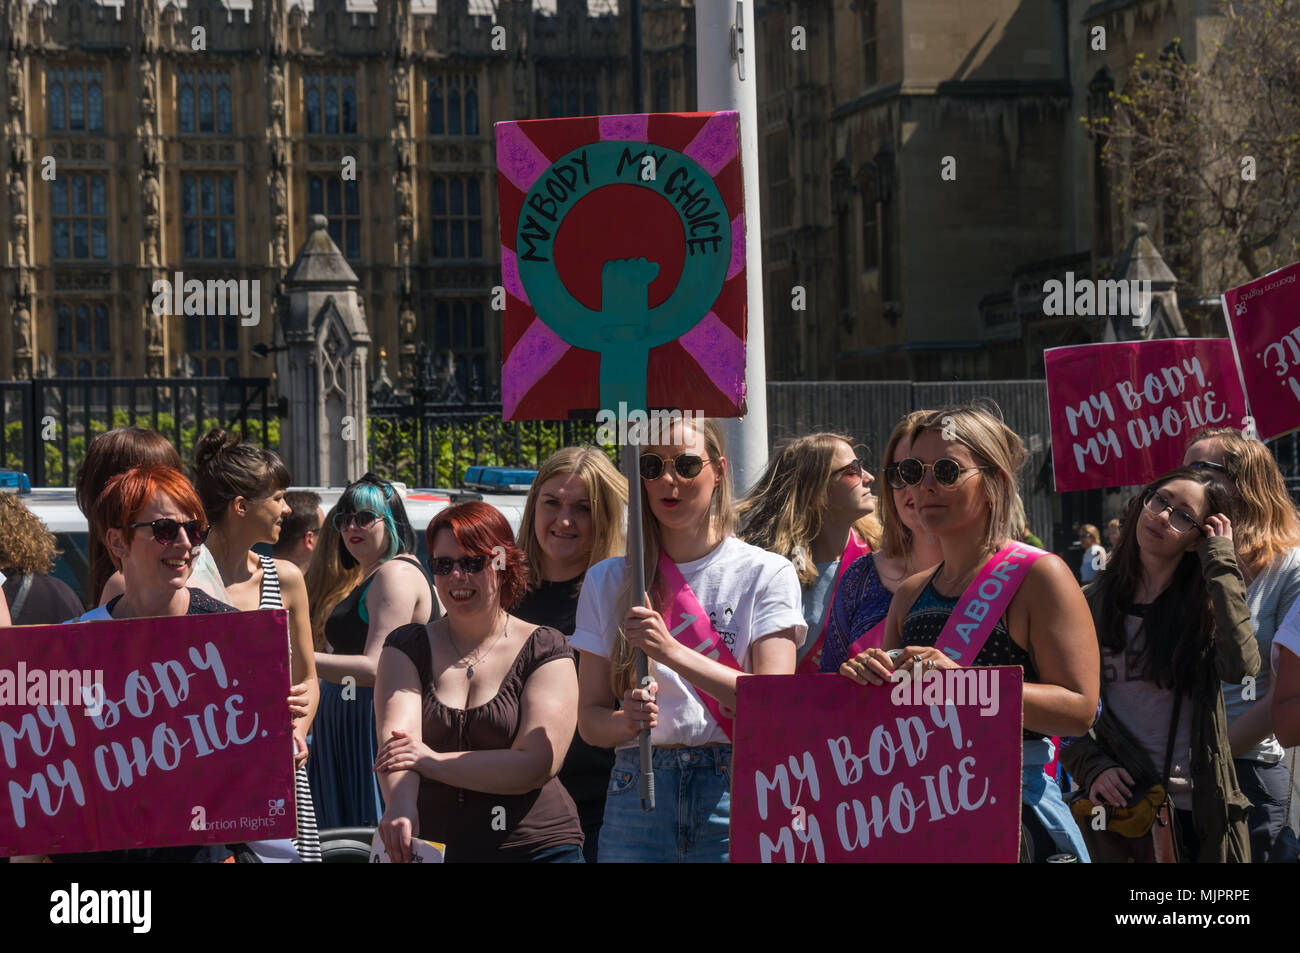 London, UK. 5th May 2018. Women in the abortion rights campaign hold posters and a placard 'My Body My Choice' at a rally in Parliament Square before the annual March for Life UK by pro-life anti-abortion campaigners was to march to a rally there. They insisted on the right for women to choose and opposed to any increase of restrictions which would lead to the problems we saw before the 1967 Abortion Act, when women risked their lives in back street abortions. They called for women in Northern Ireland to be given the same rights as in the rest of the UK and for an end of the harassment of wome Stock Photo